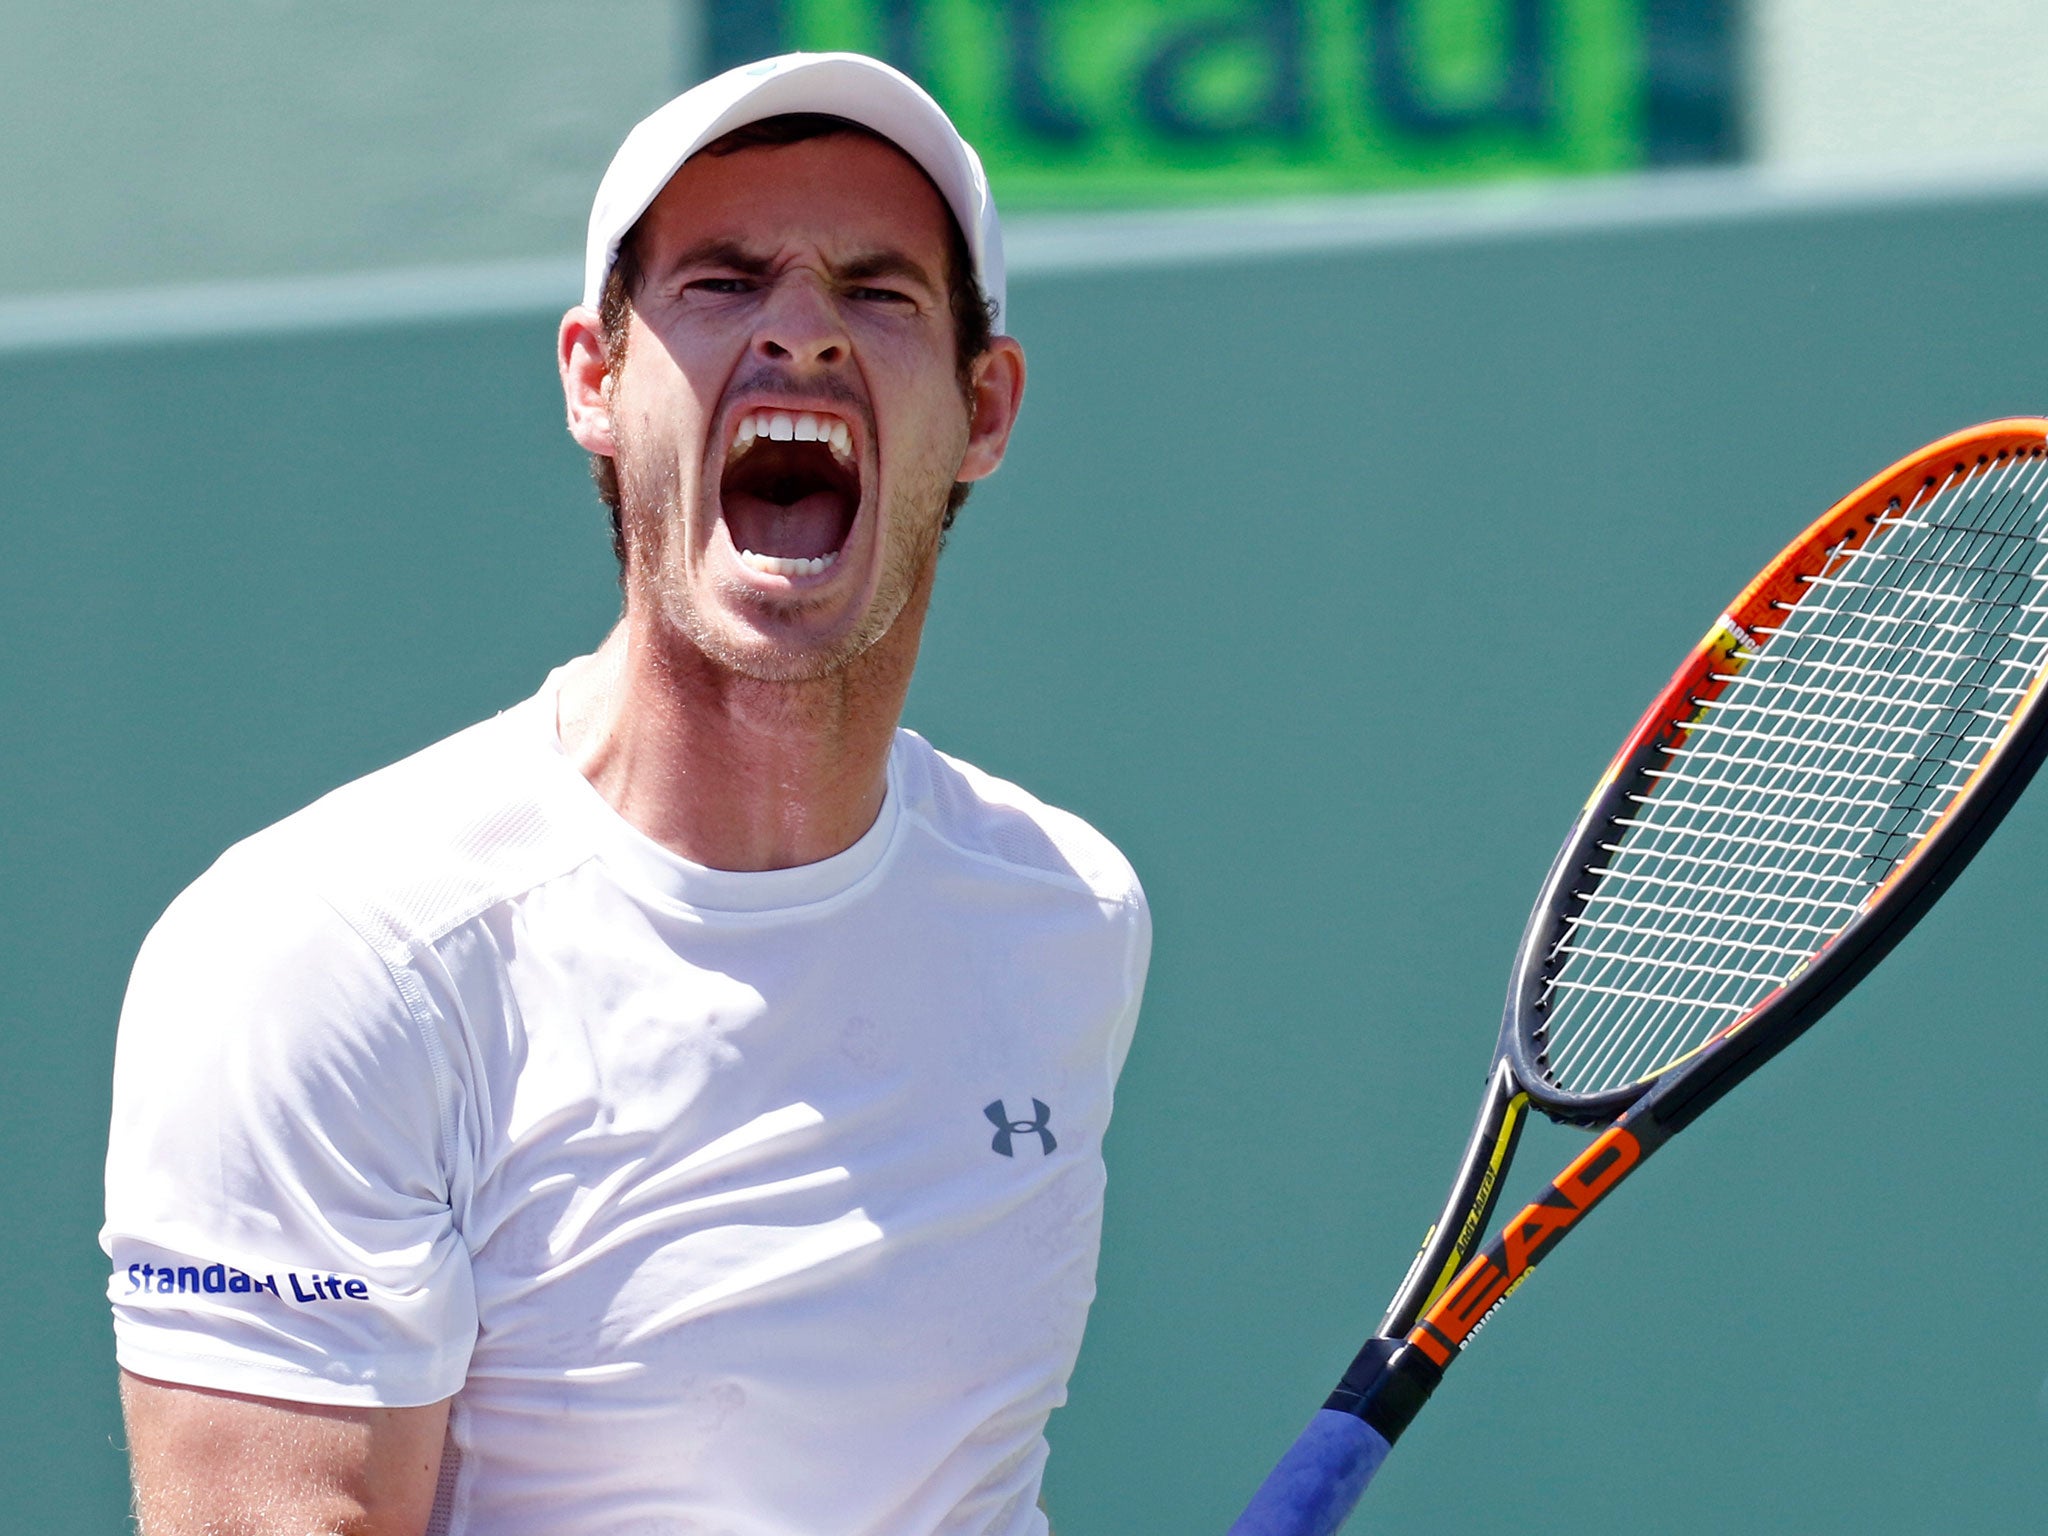 Andy Murray reacts after losing a point to Novak Djokovic during the men's final match at the Miami Open